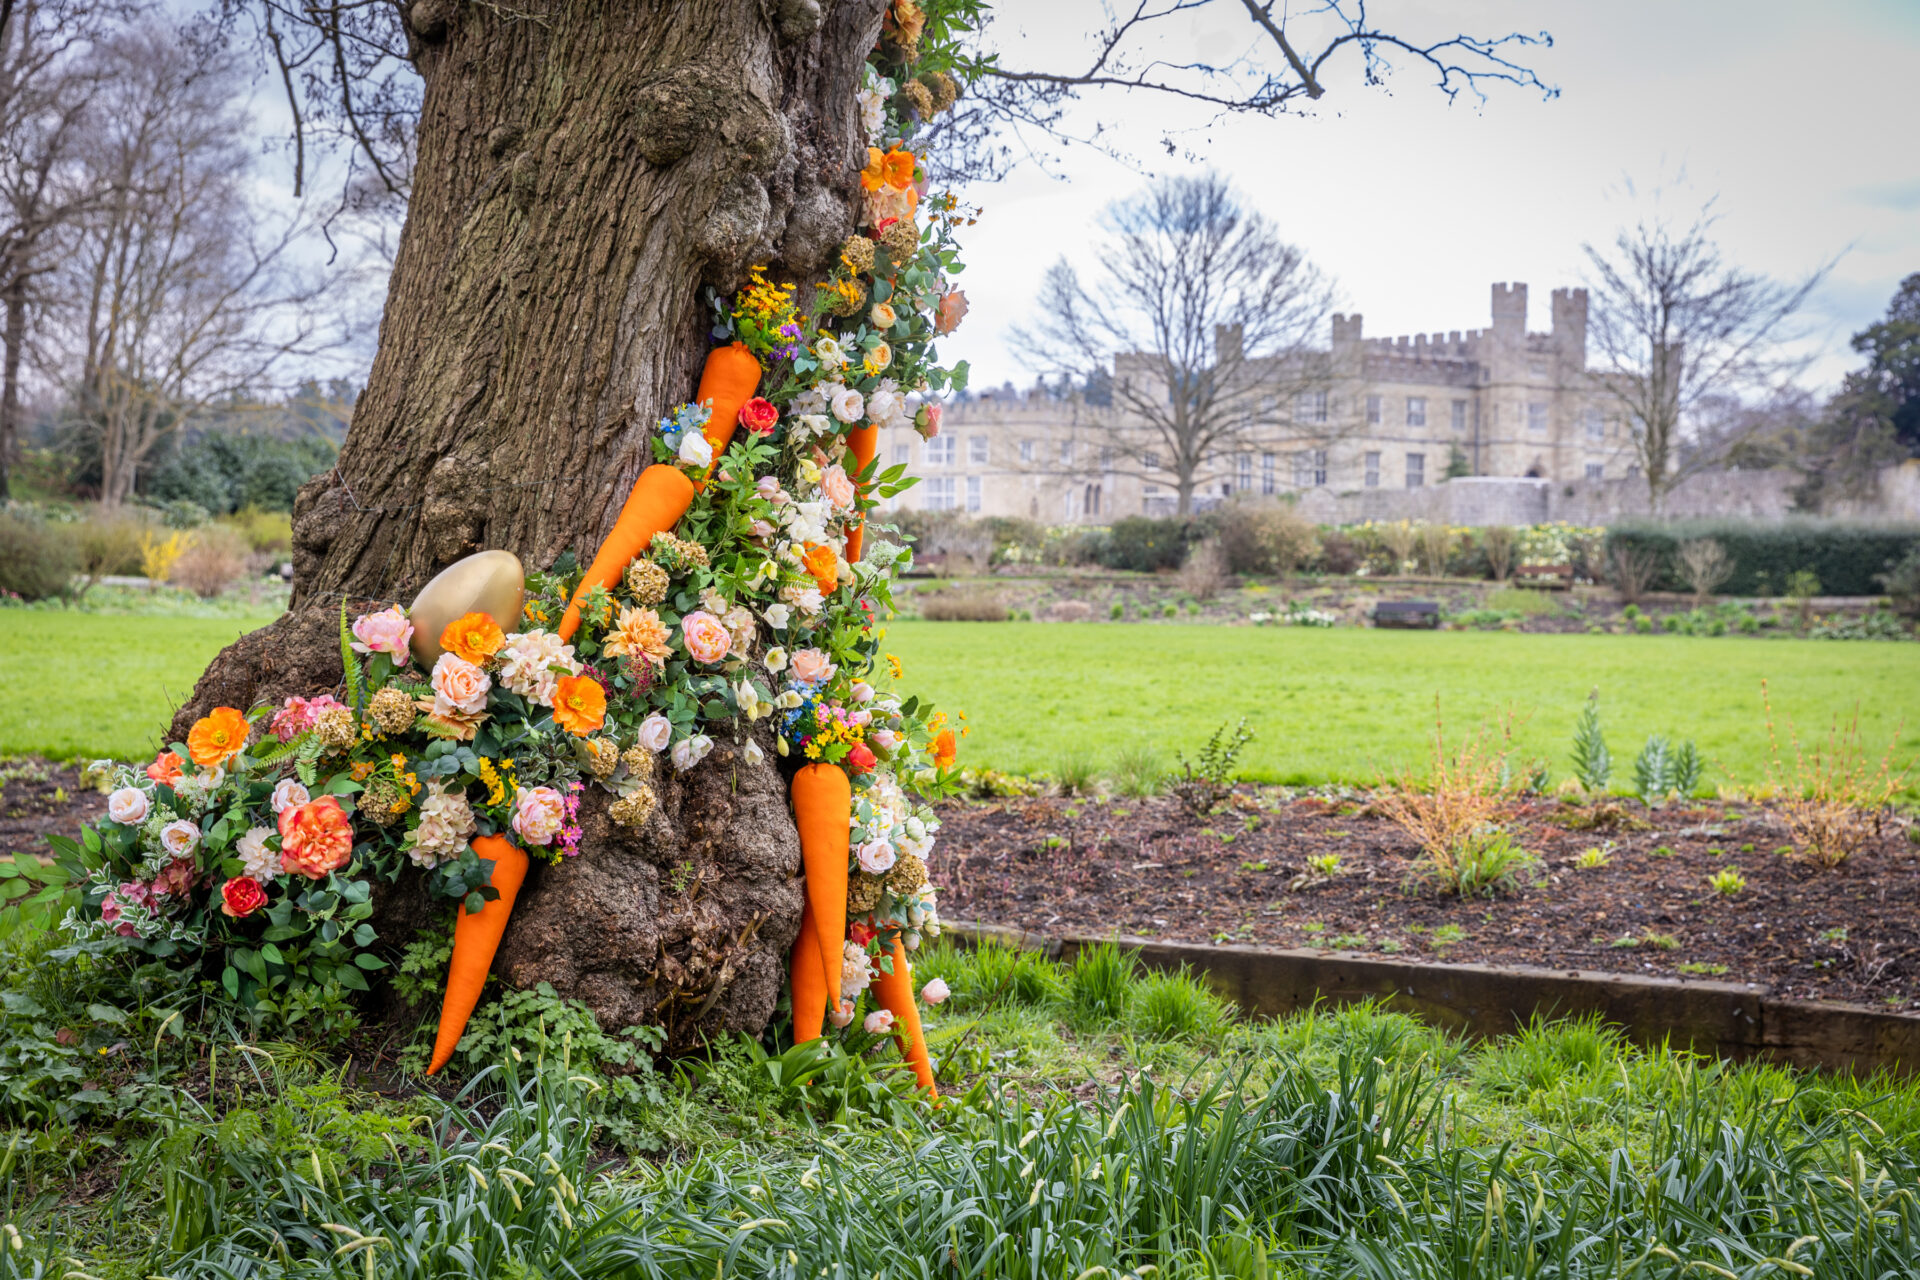 Tree decorated with flowers and carrots